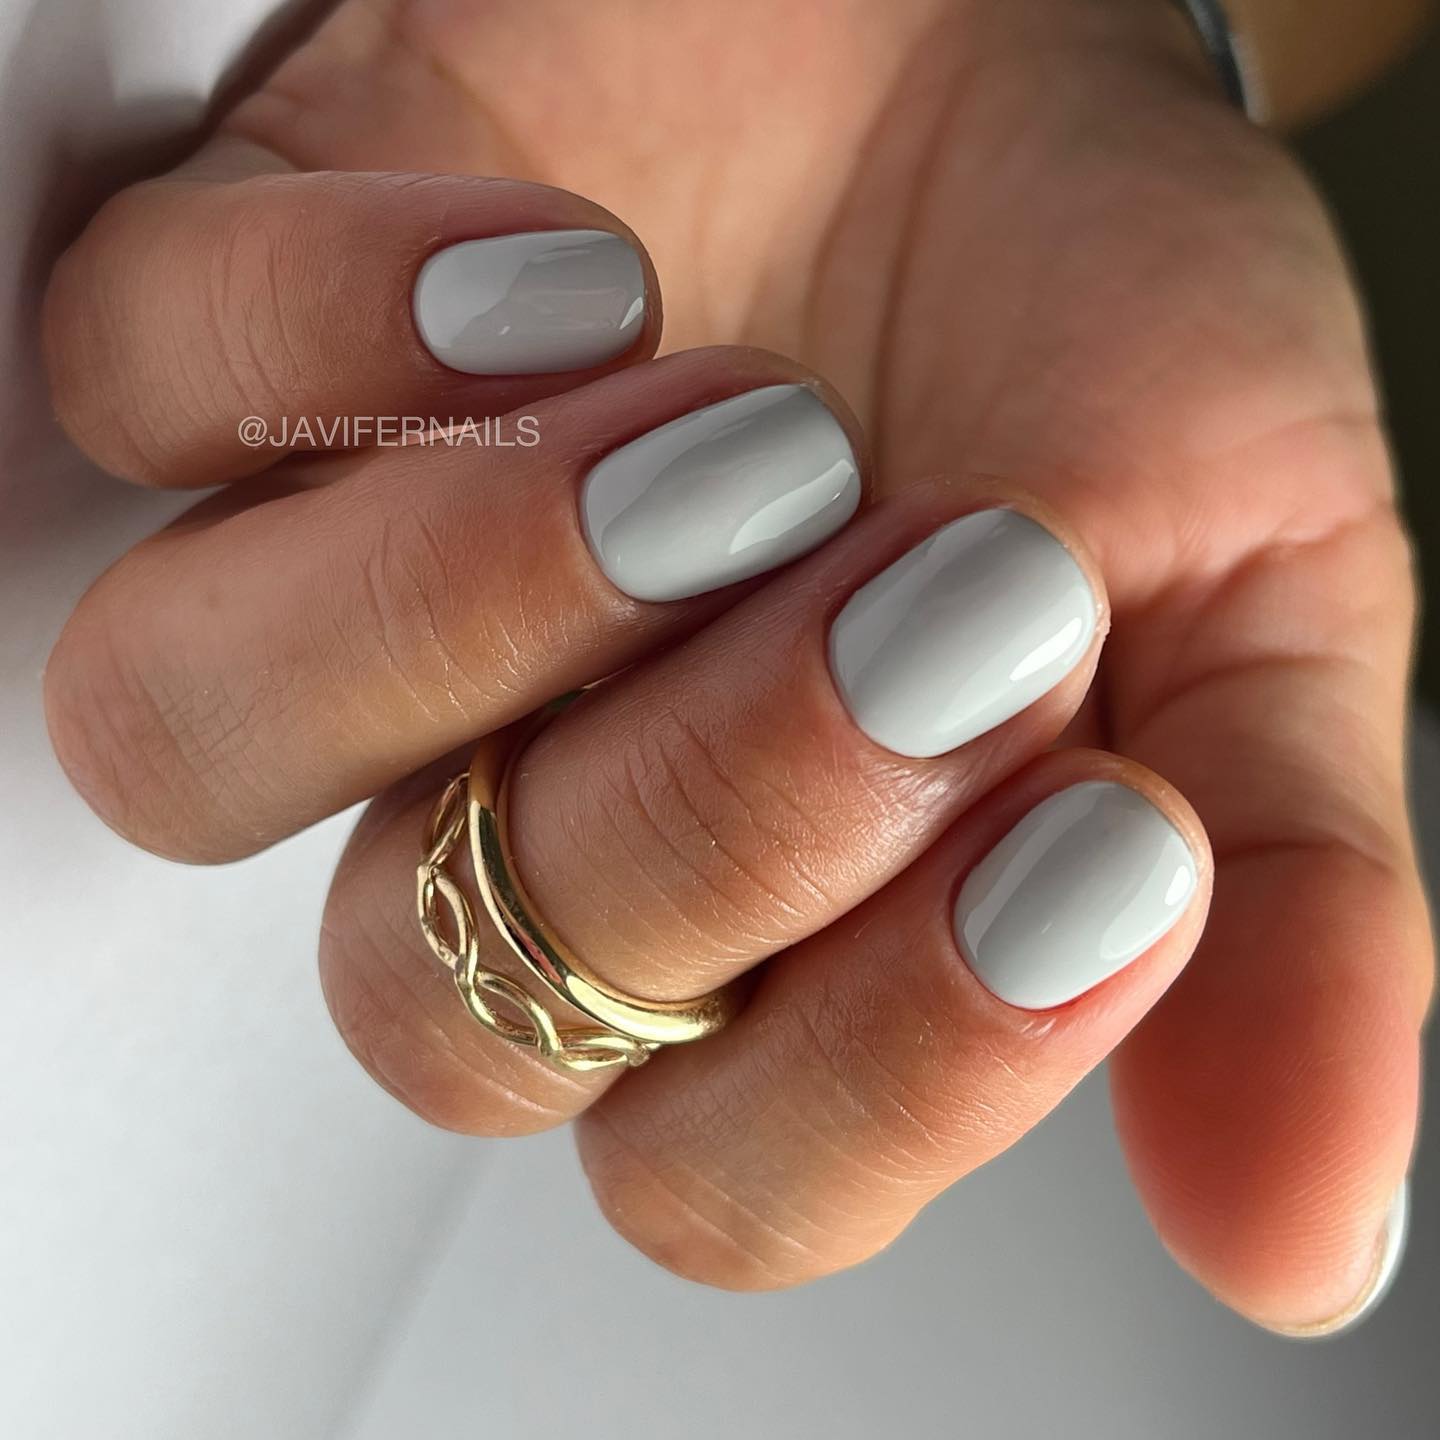 100+ Short Nail Designs You’ll Want To Try This Year images 17